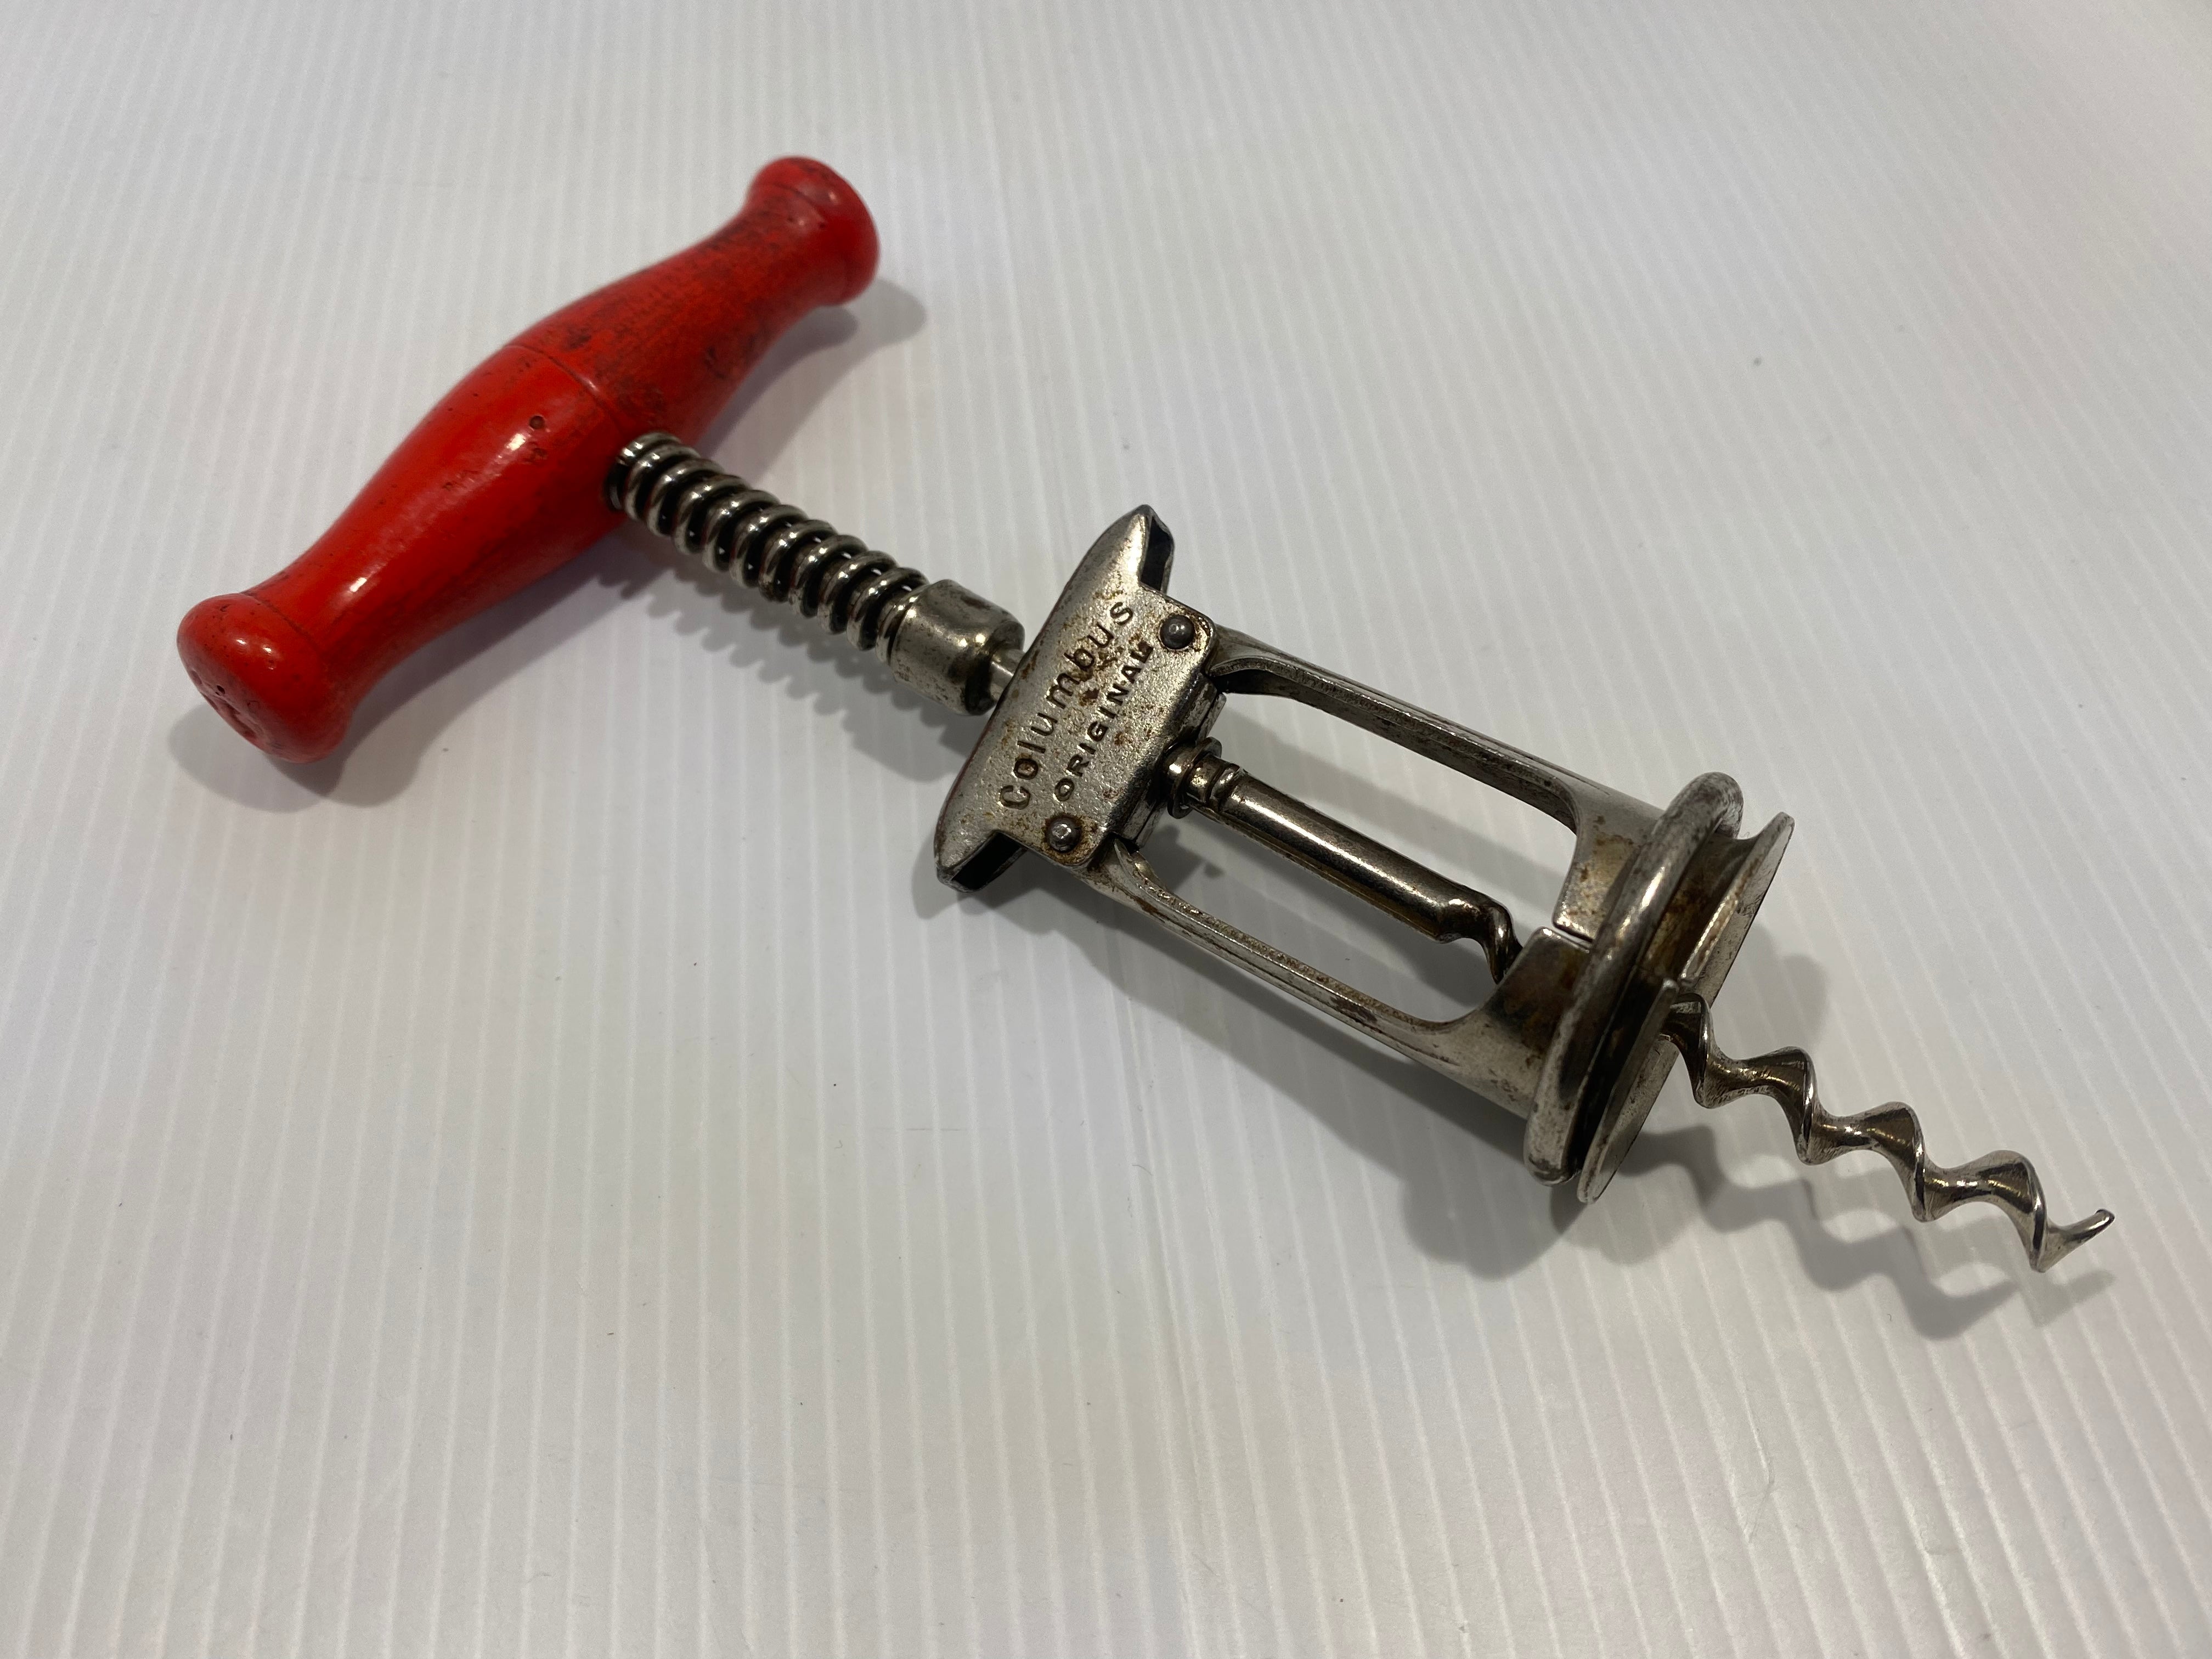 Columbus corkscrew manufactured in Germany